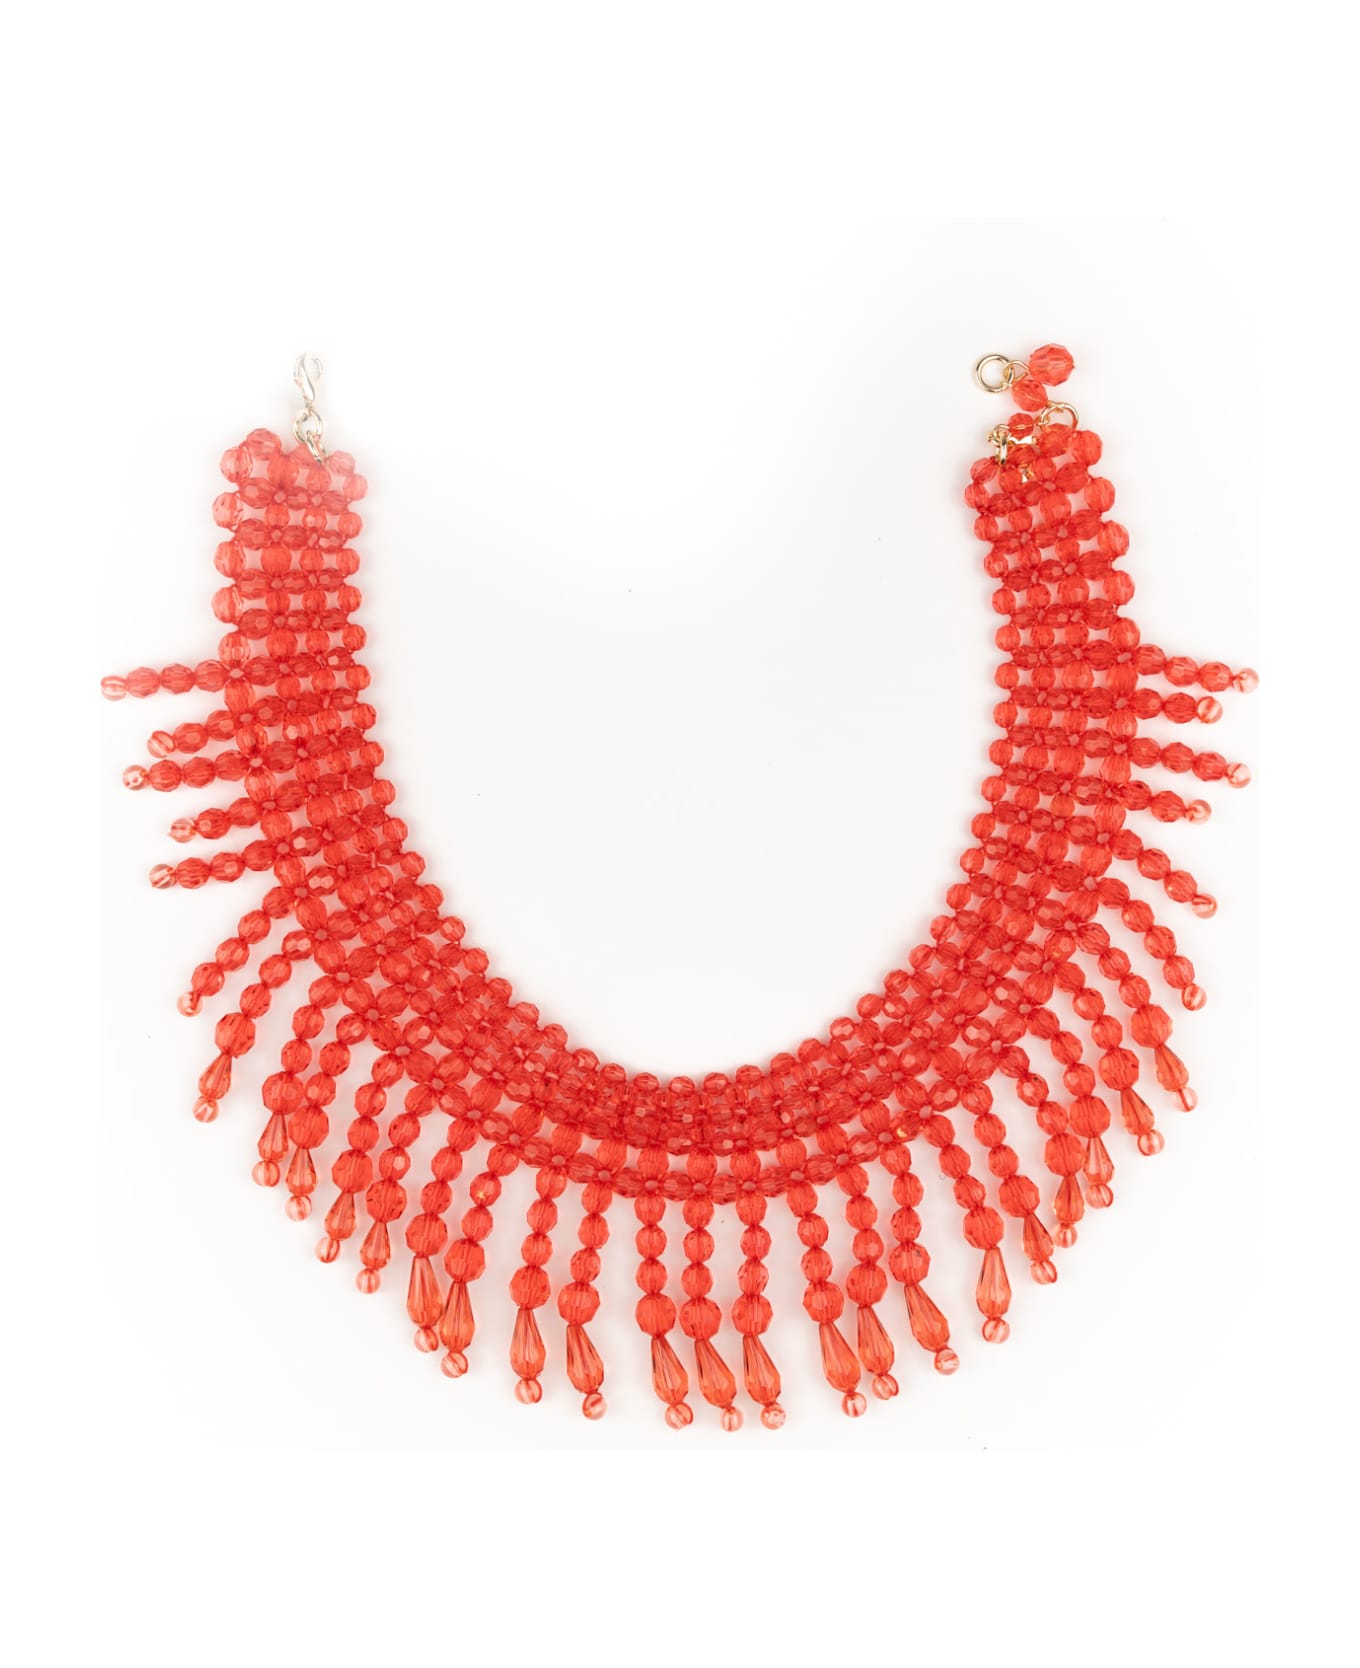 TwinSet Necklace With Red Glass Beads - Orange sun ネックレス